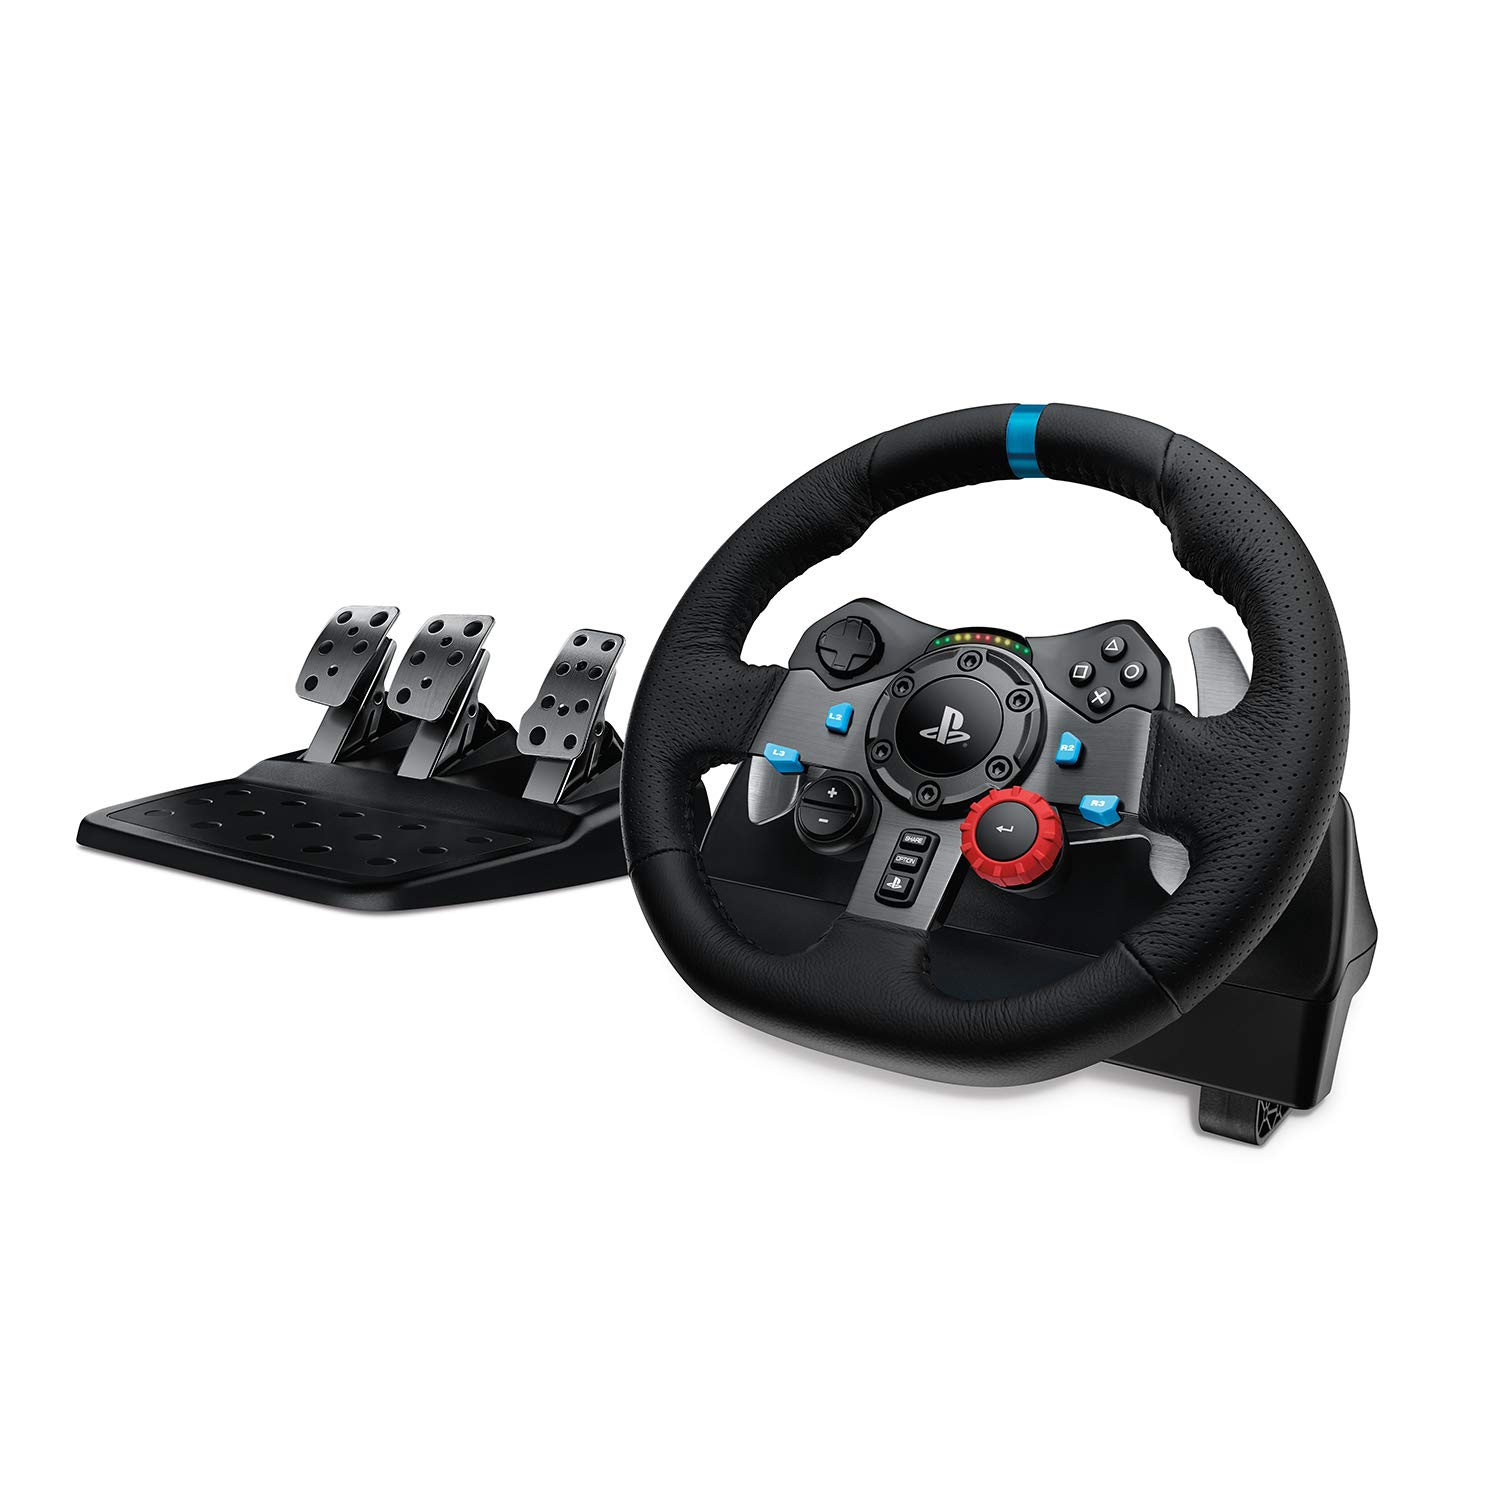 Logitech G Dual-Motor Feedback Driving Force G29 Gaming Racing Wheel with Responsive Pedals for PlayStation 5, PlayStation 4 and PlayStation 3 - Black $226.47 at Amazon